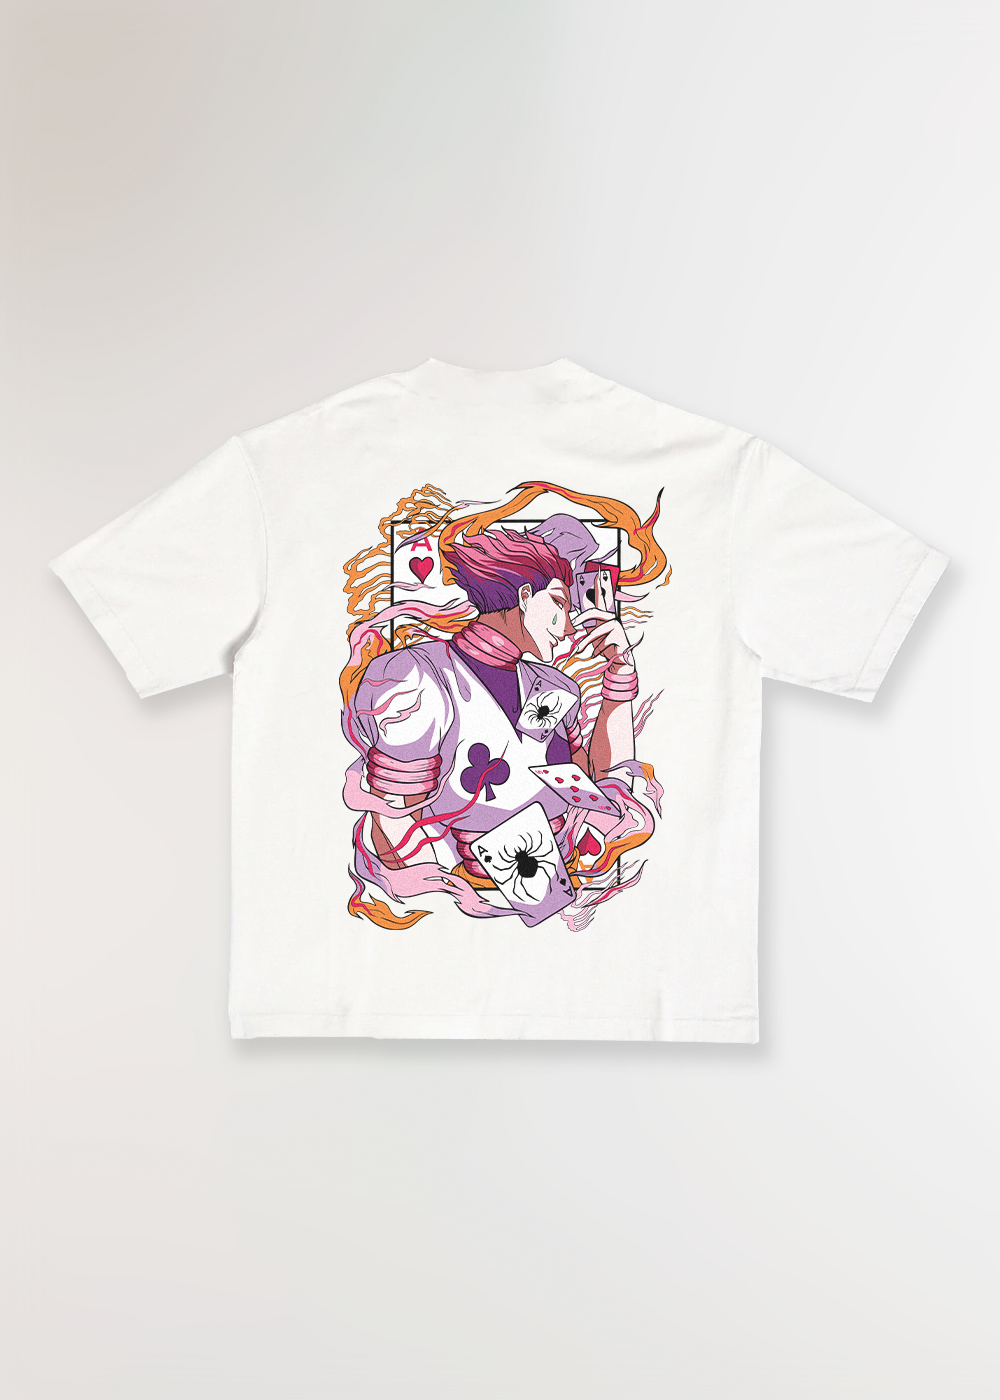 MADE IN JAPAN - THE MAGICIAN® WHITE TEE